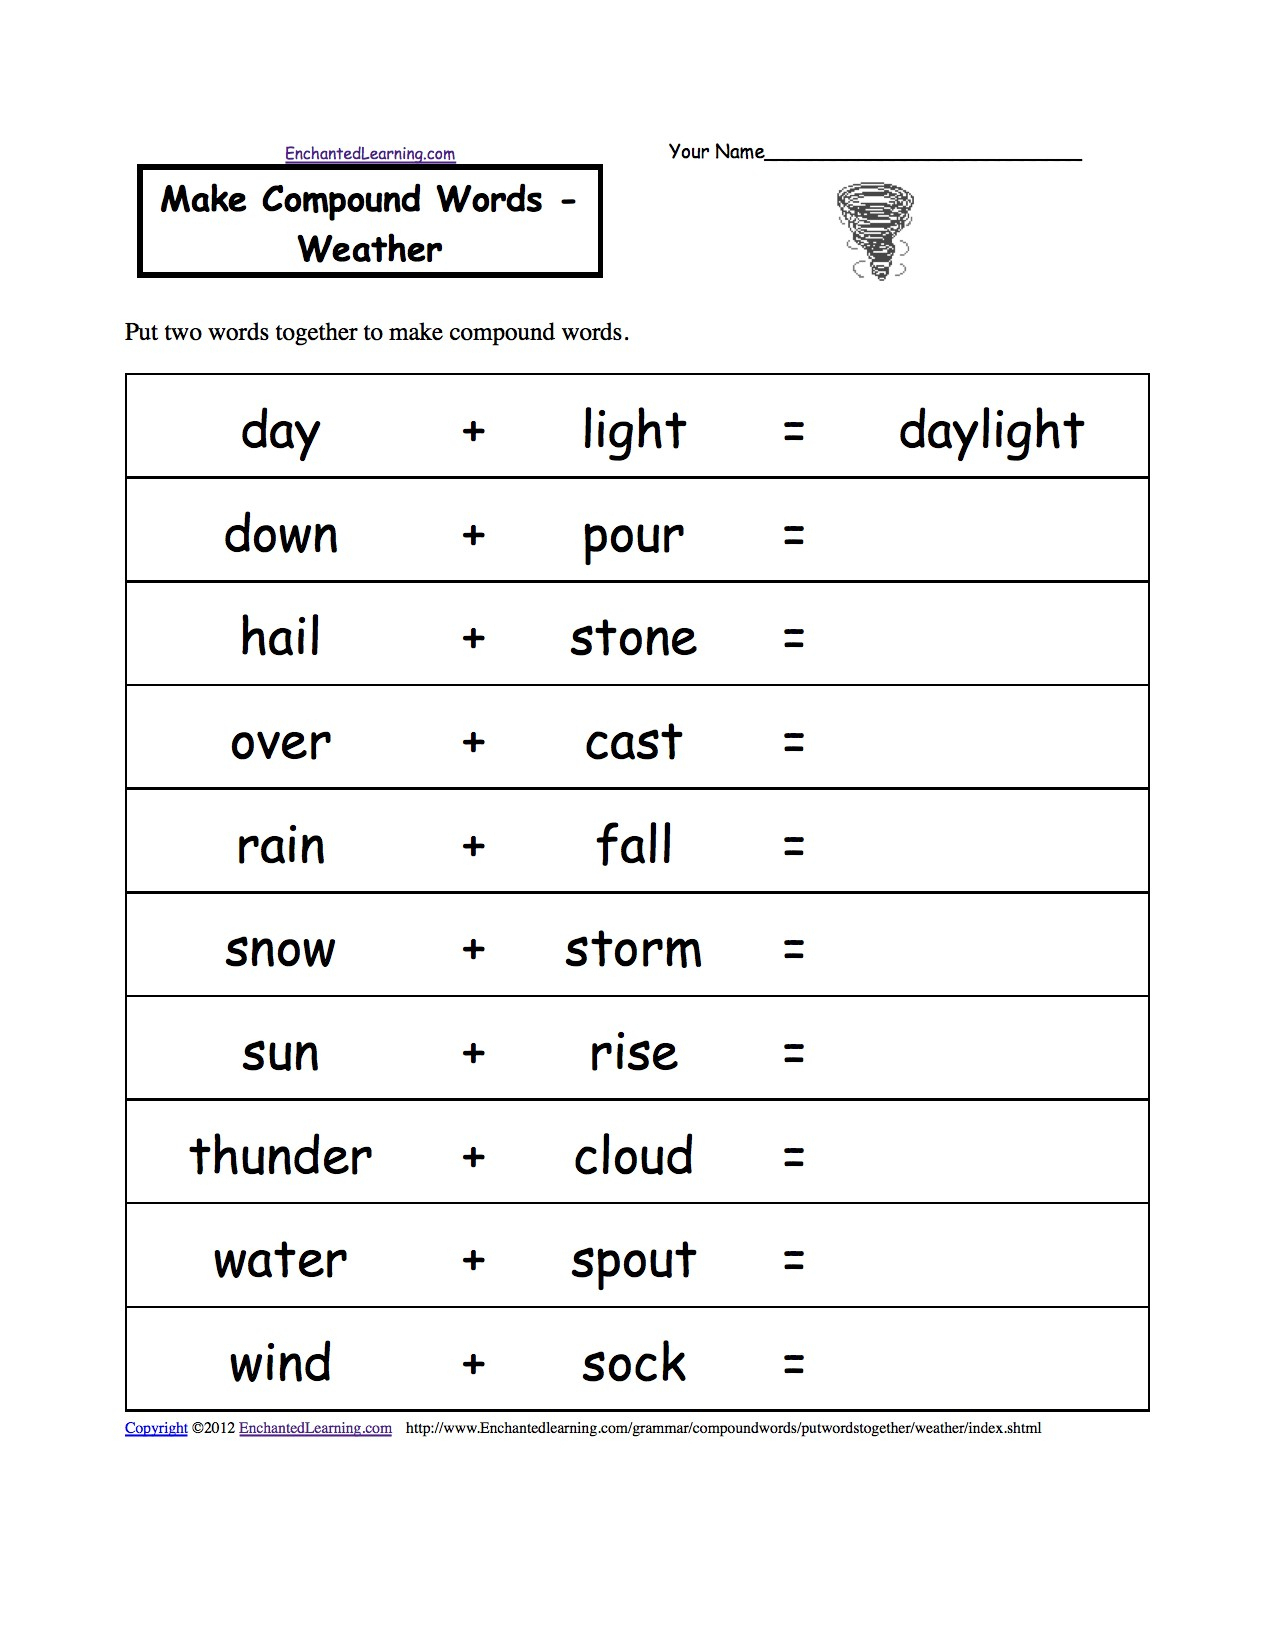 Free Printable Science Worksheets For 2Nd Grade – Worksheet Template | Free Printable Science Worksheets For Grade 2